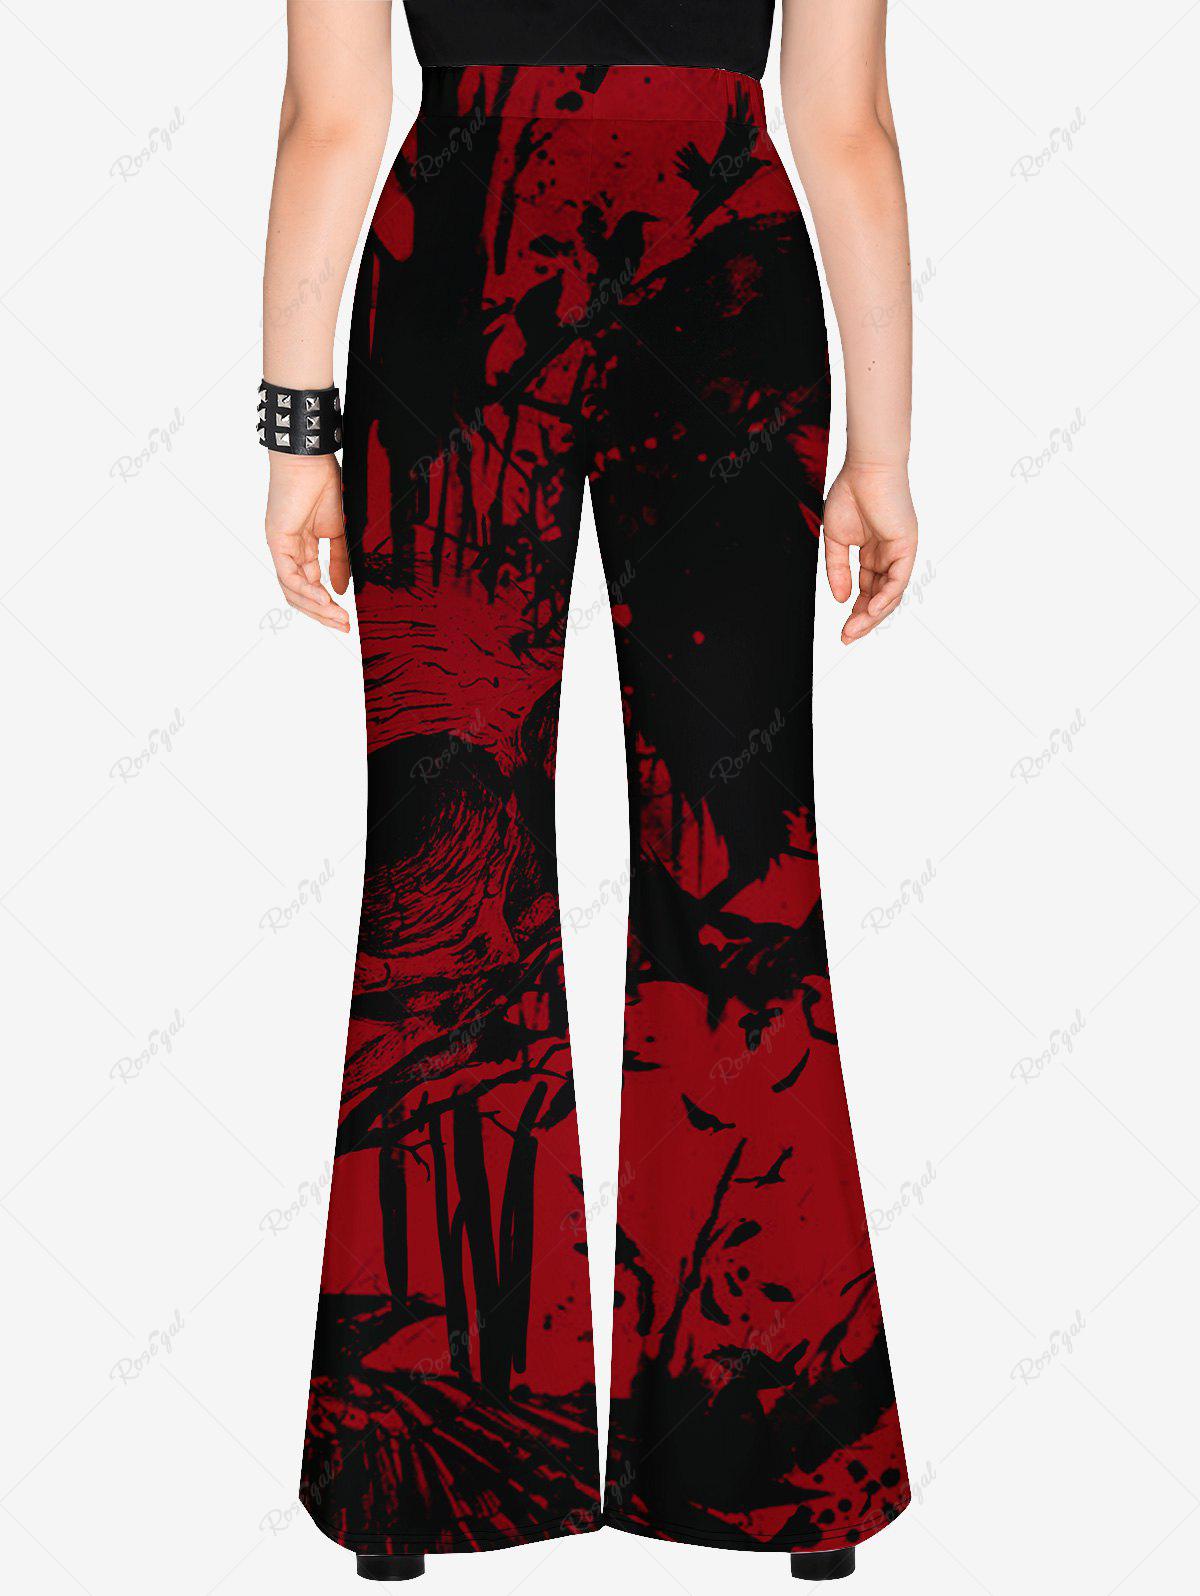 💗Stephanie Loves💗 Gothic Eagle Branch Print Flare Pants